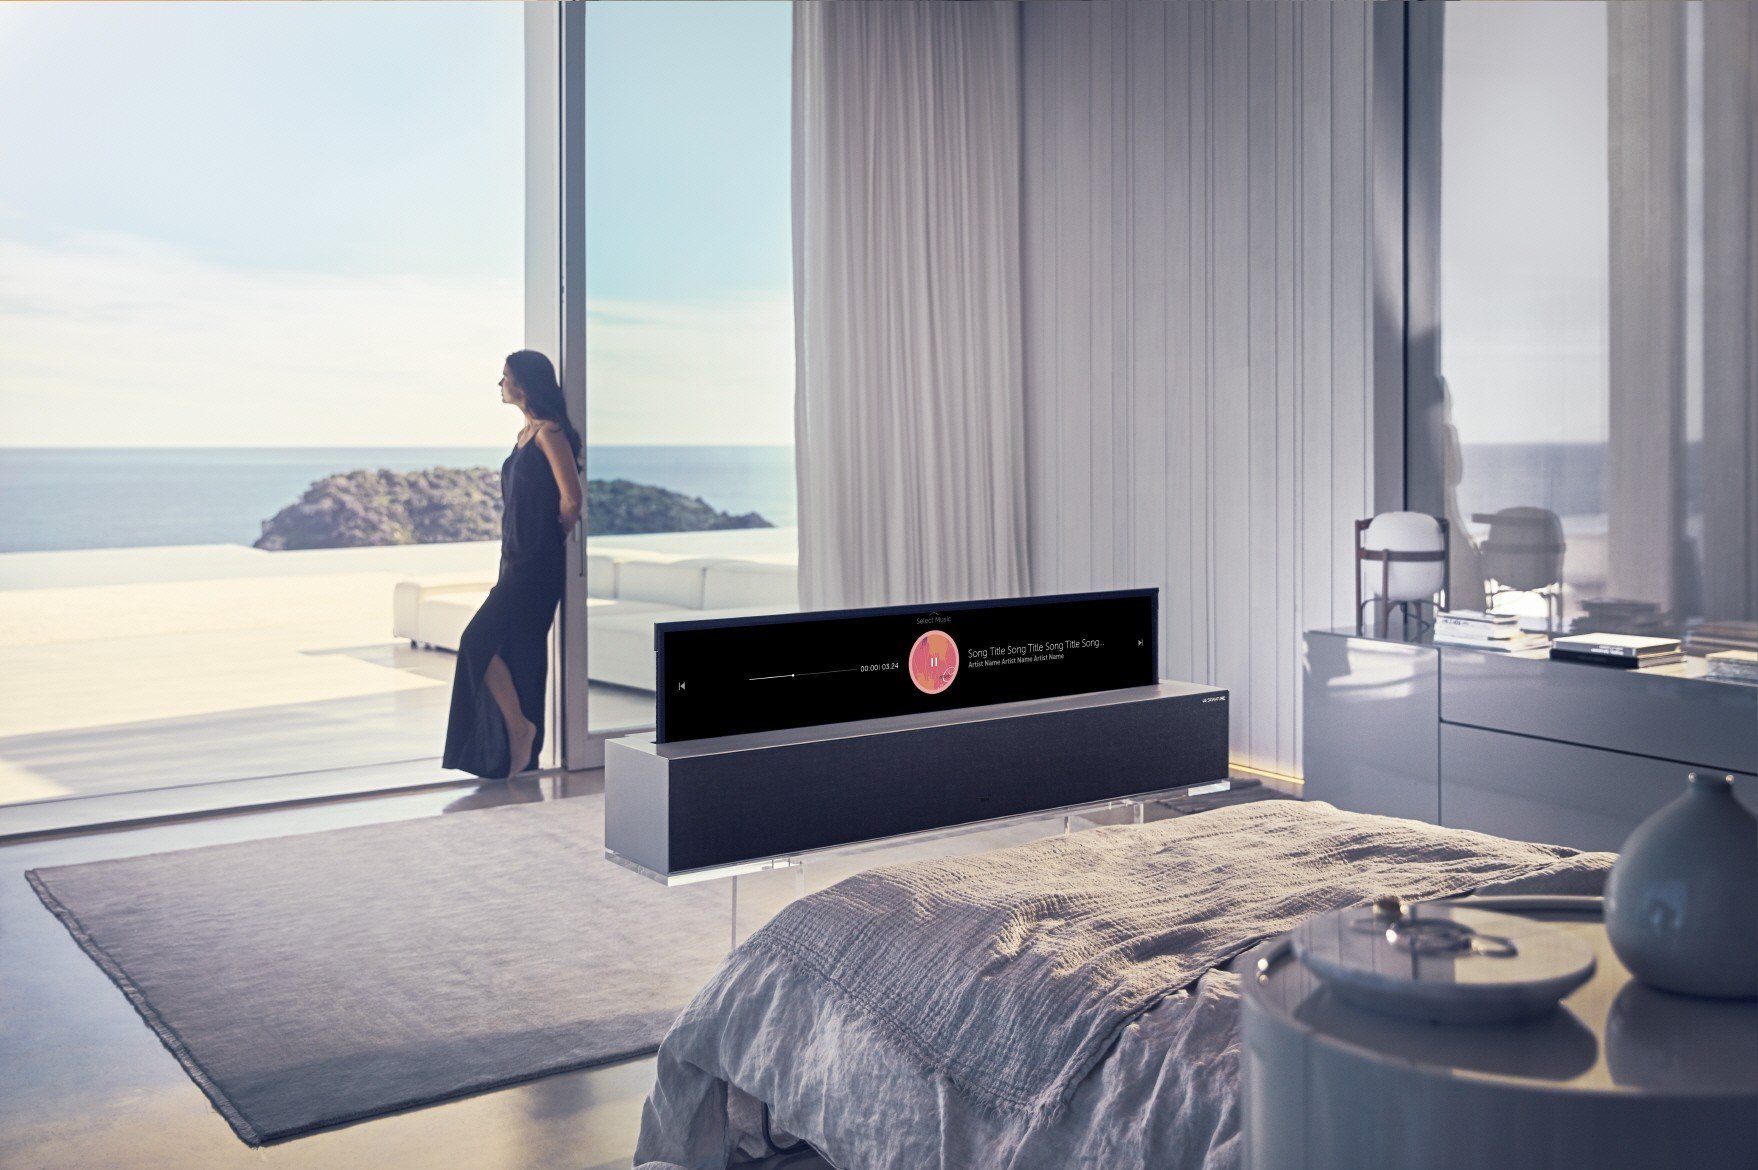 LG's rollable OLED TV is a stunning update to how we think about televisions